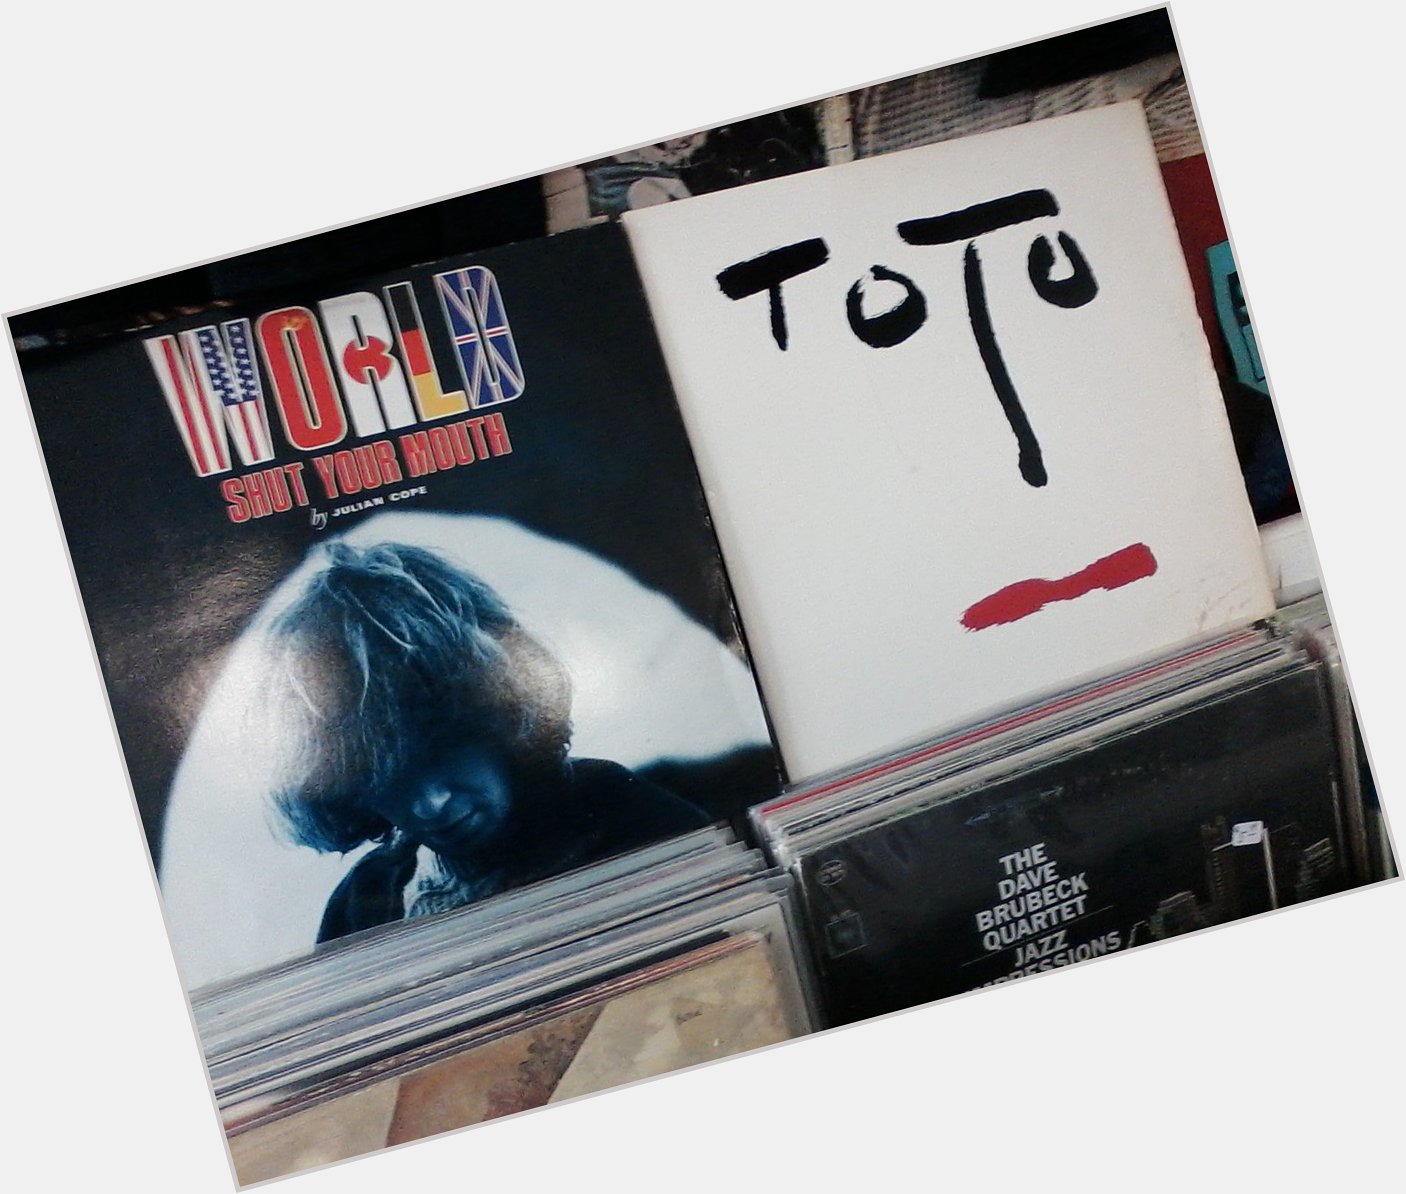 Happy Birthday to Julian Cope & Steve Lukather of Toto 